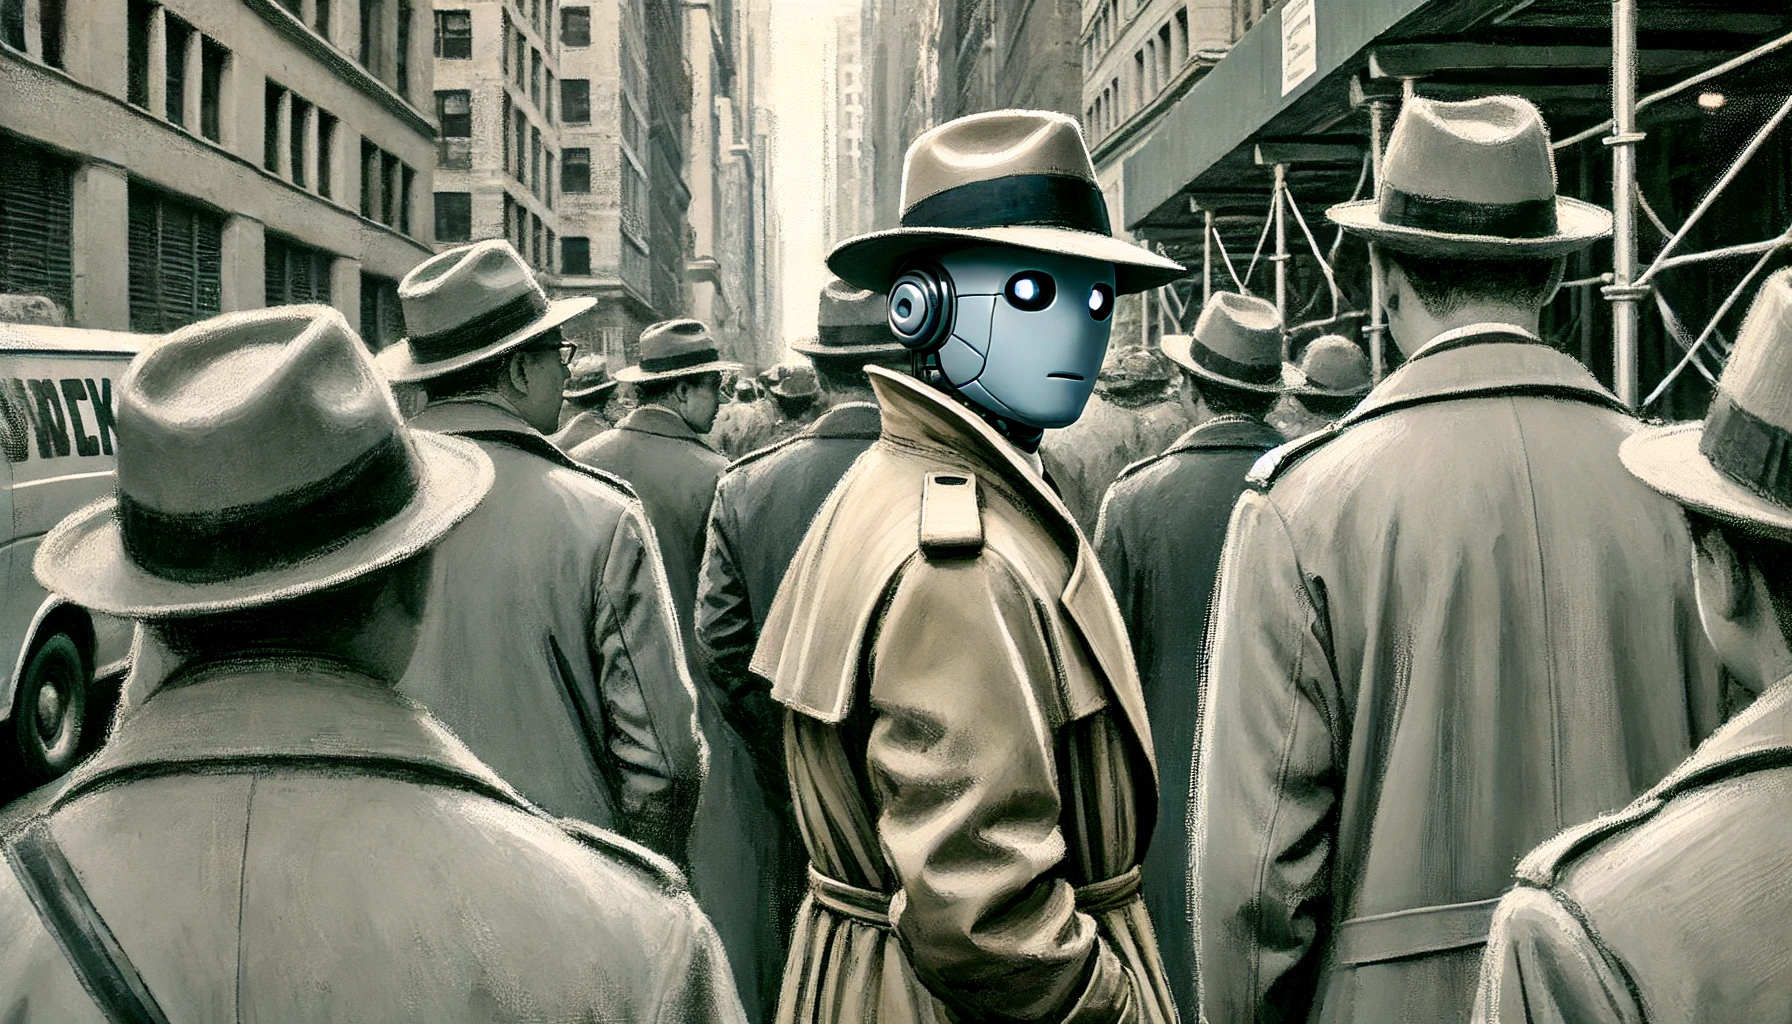 A robot spy, wearing a trench coat, looking at the camera, on a gray city street, surrounded by people.